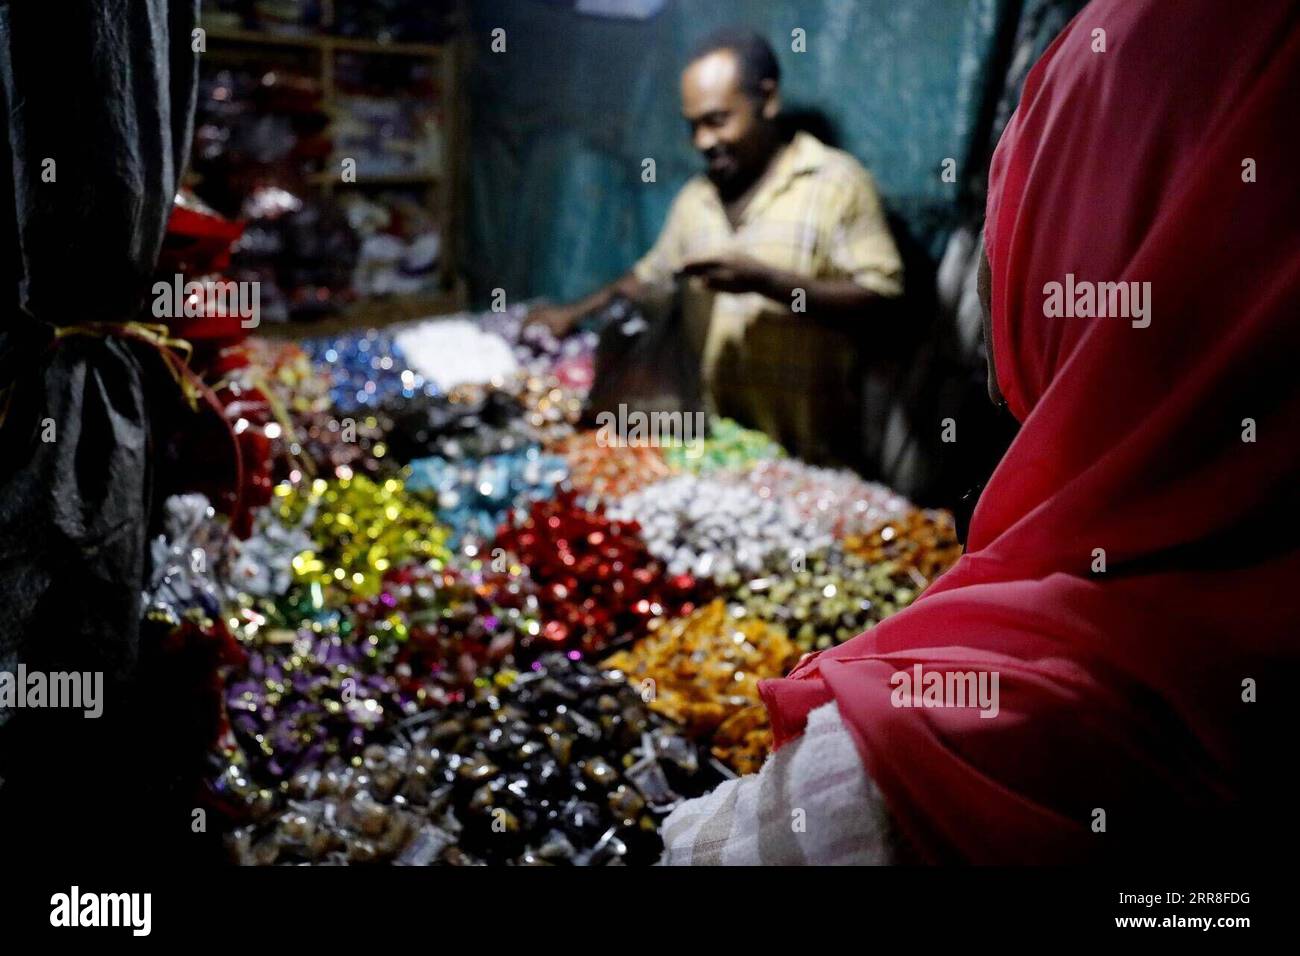 210506 -- KHARTOUM, May 6, 2021 -- A vendor sells sweets at a market in Khartoum, Sudan, May 5, 2021. Eid Al-Fitr, also called the festival of breaking the fast that marks the end of the month-long dawn-to-sunset fasting of Ramadan, is celebrated by Muslims worldwide.  SUDAN-KHARTOUM-EID AL-FITR-SHOPPING MohamedxKhidir PUBLICATIONxNOTxINxCHN Stock Photo